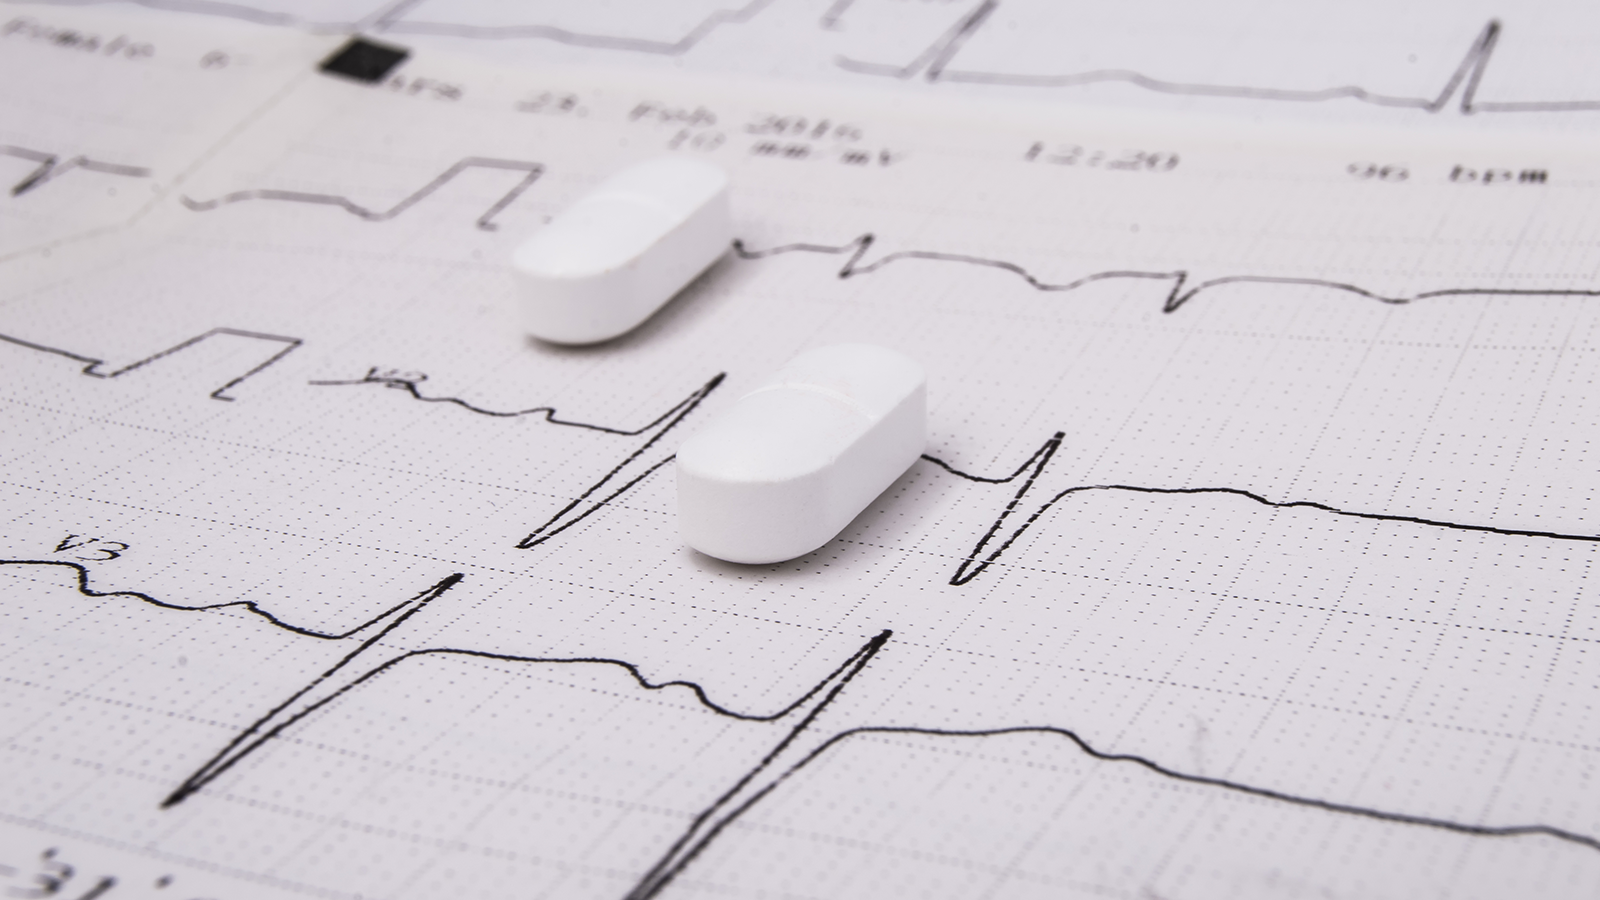 White pills on paper with EKG trace